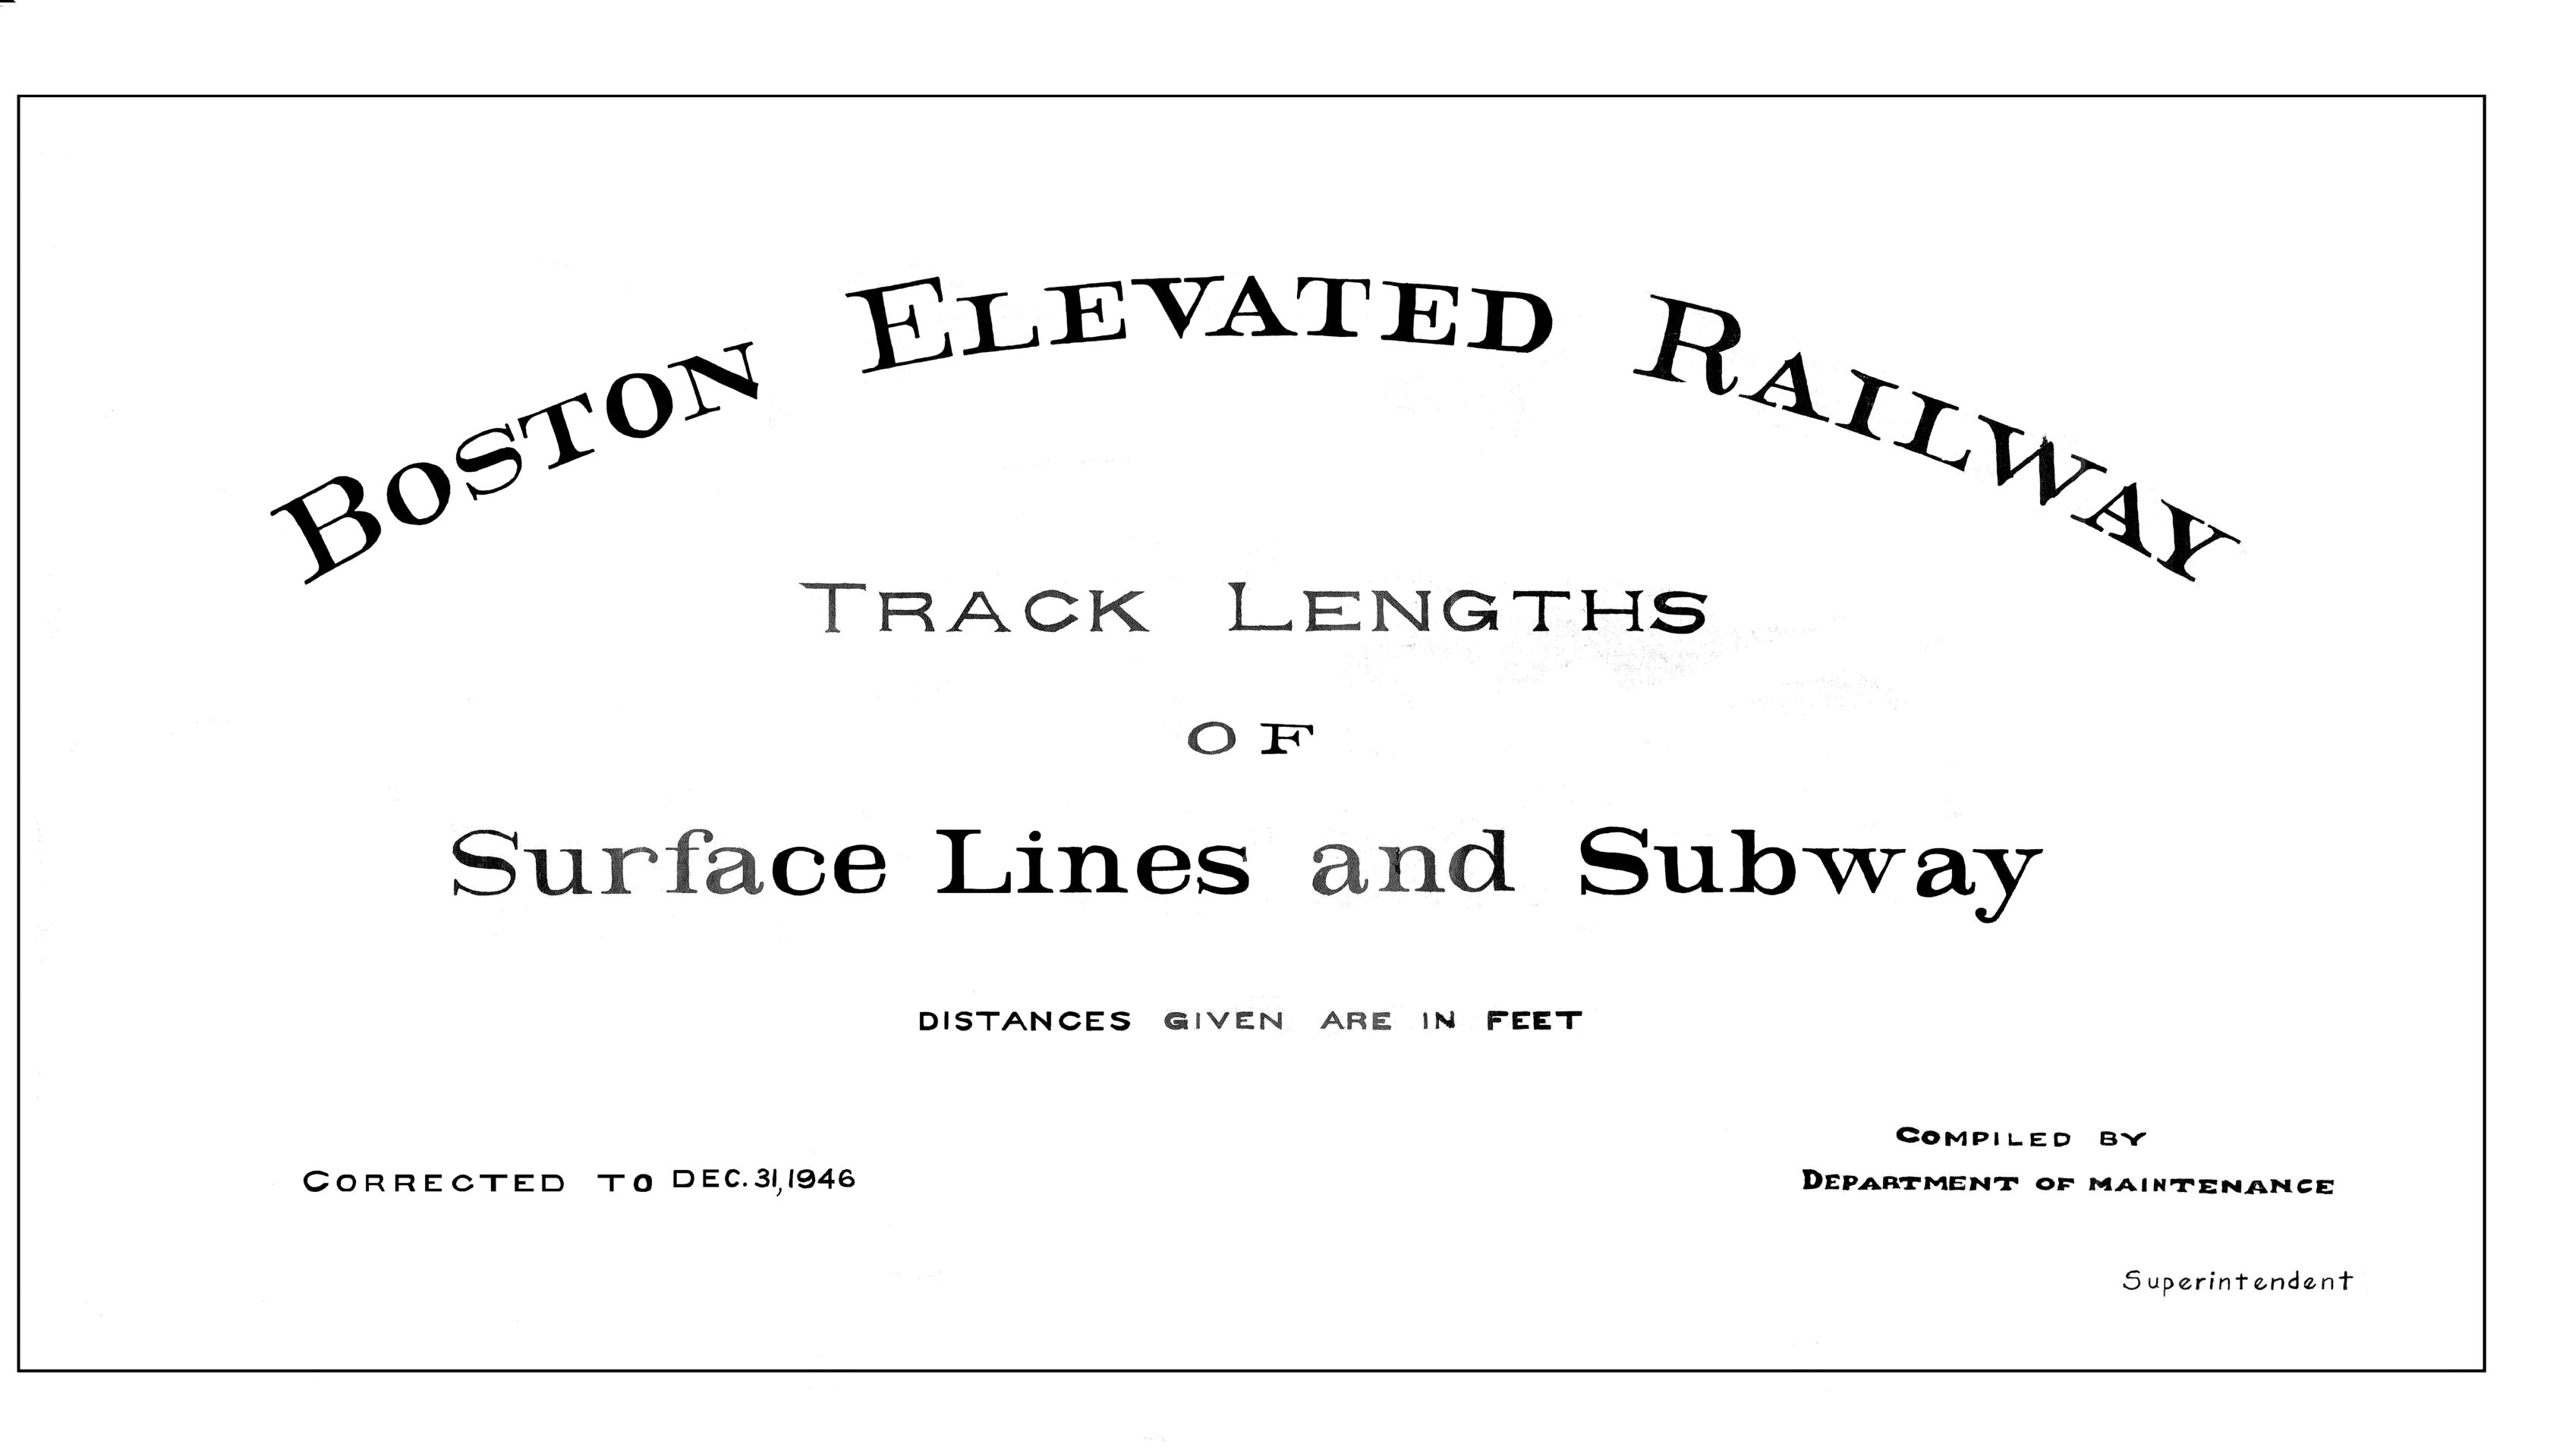 Boston Elevated Railway track lengths of surface lines and subway